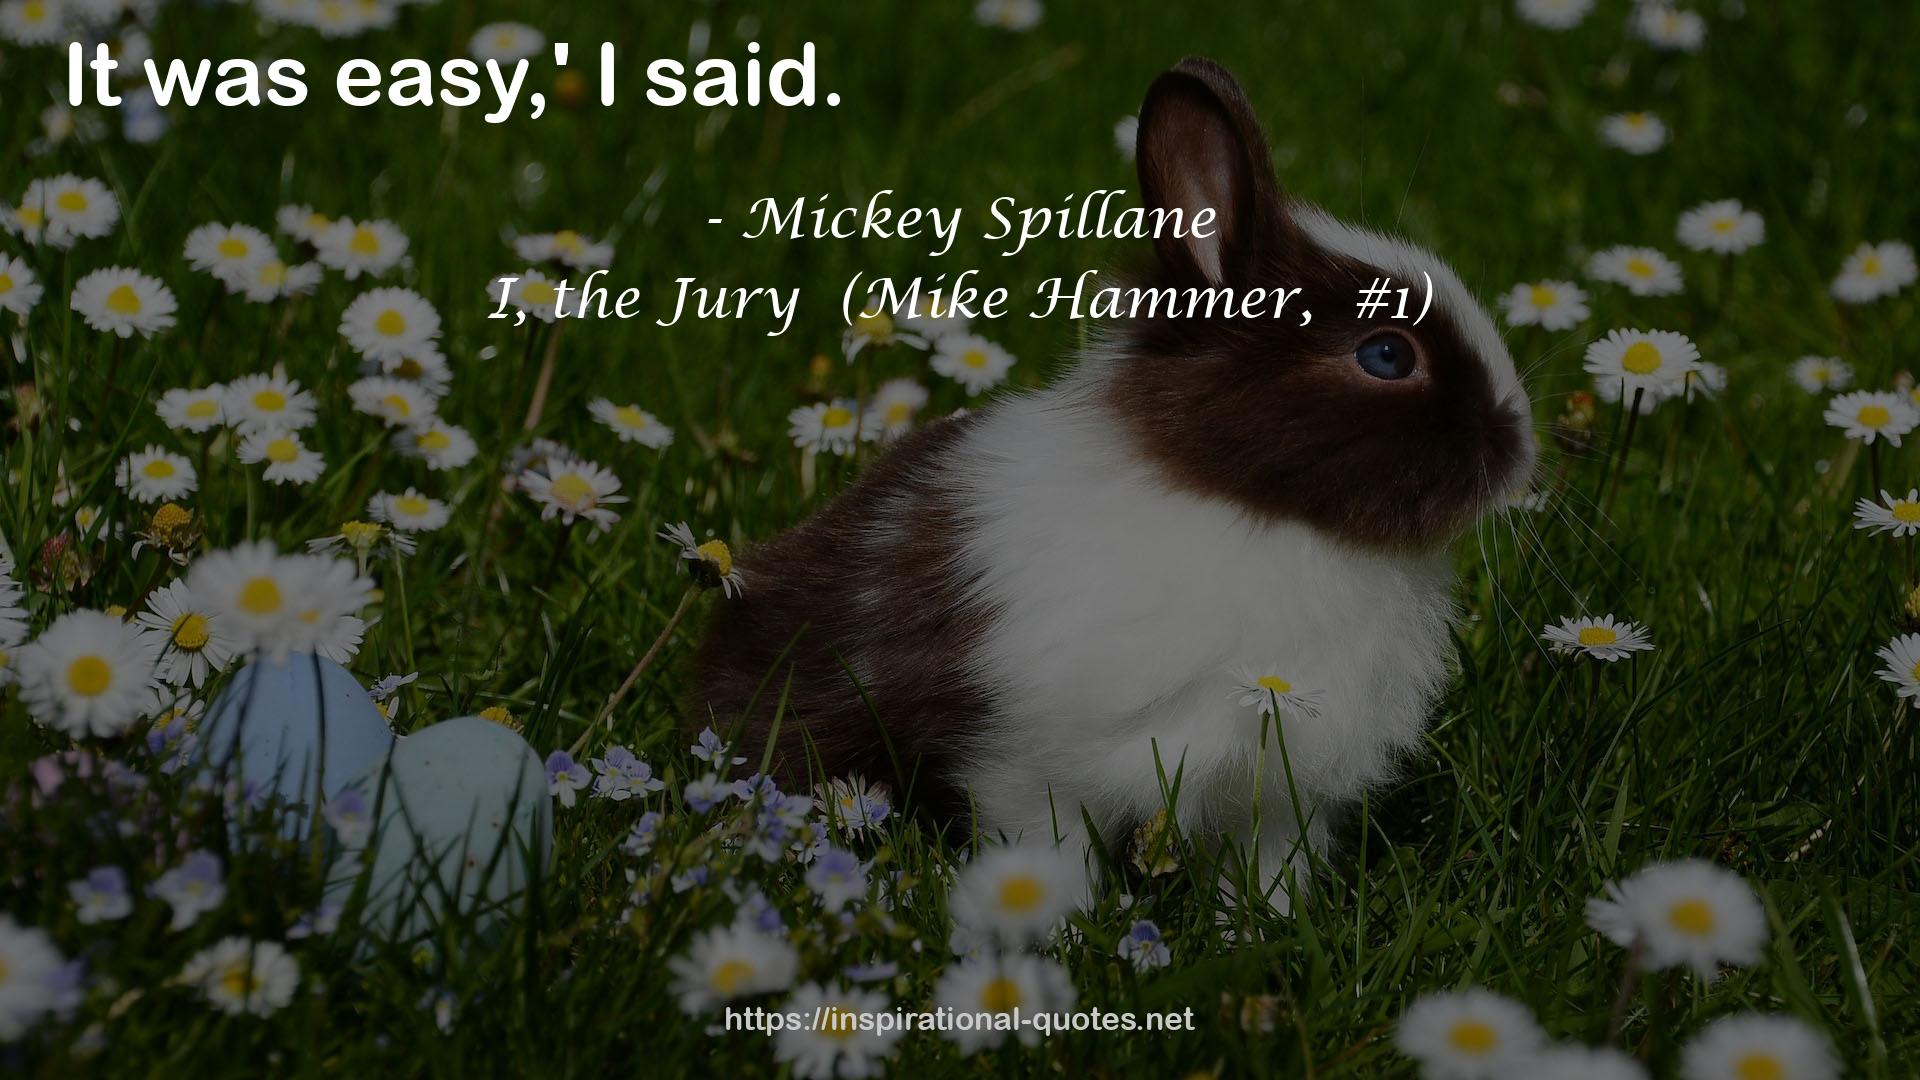 I, the Jury  (Mike Hammer,  #1) QUOTES